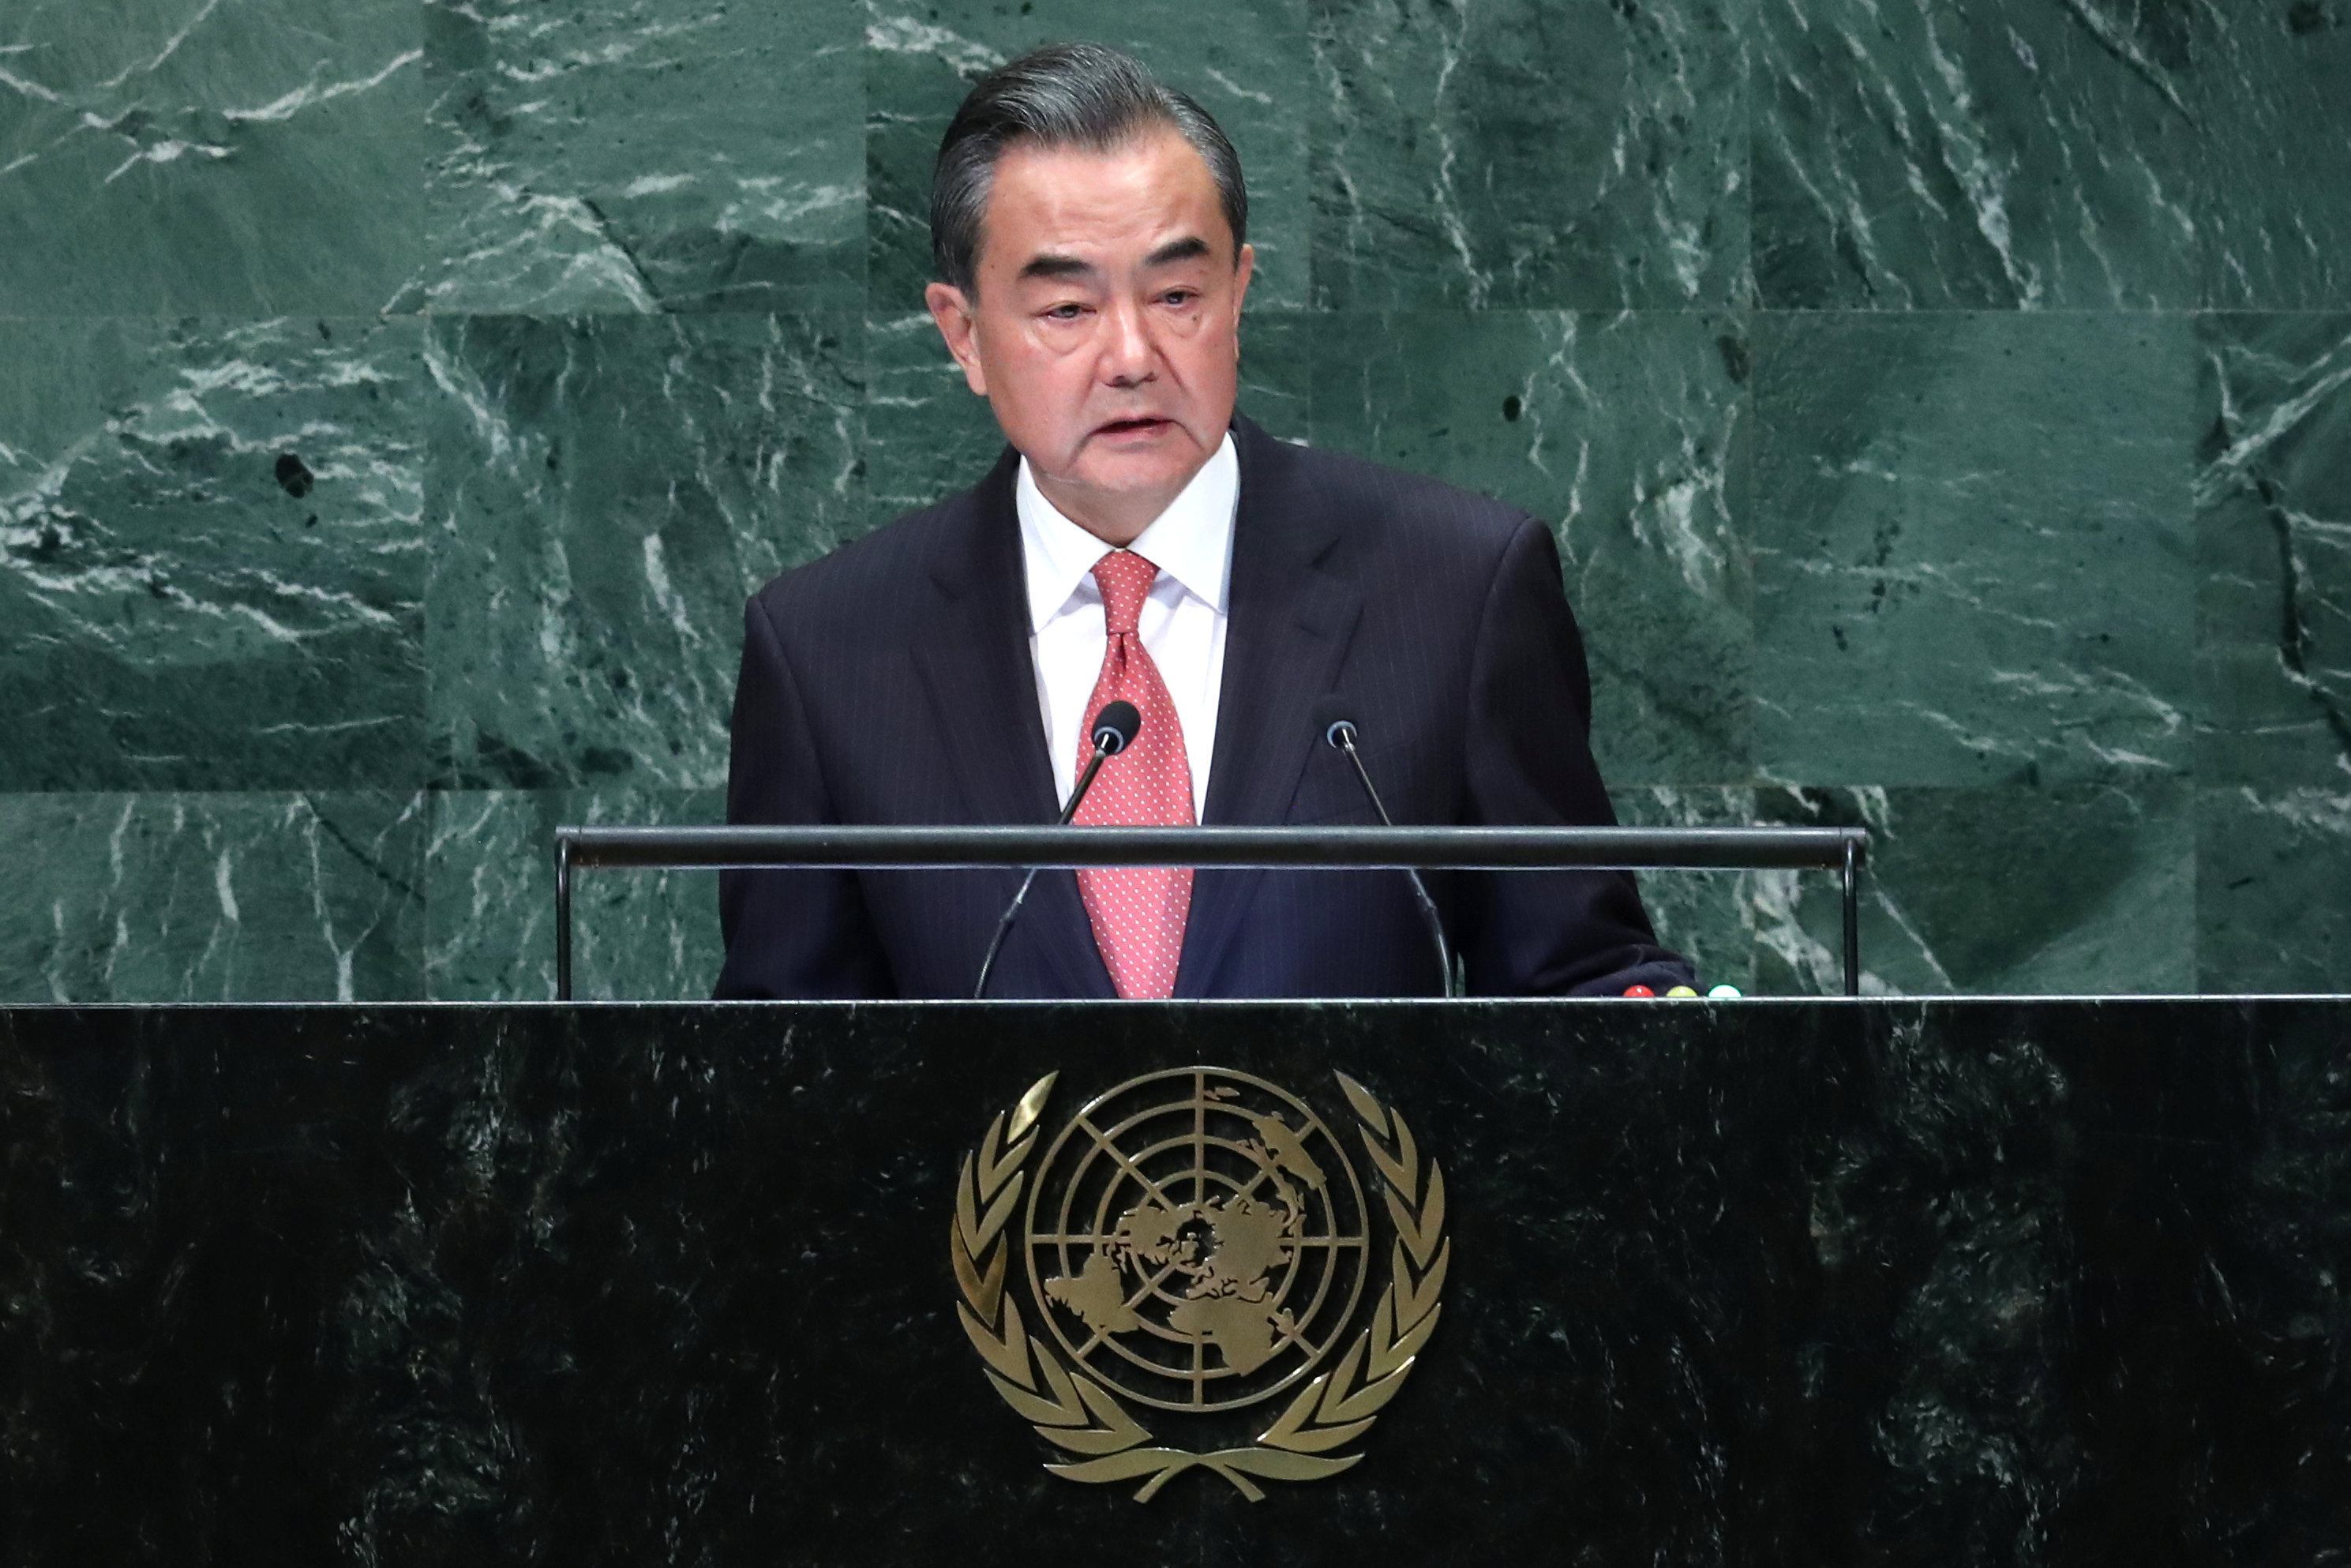 China's Foreign Minister Wang Yi addresses the United Nations General Assembly at U.N. headquarters in New York, U.S.